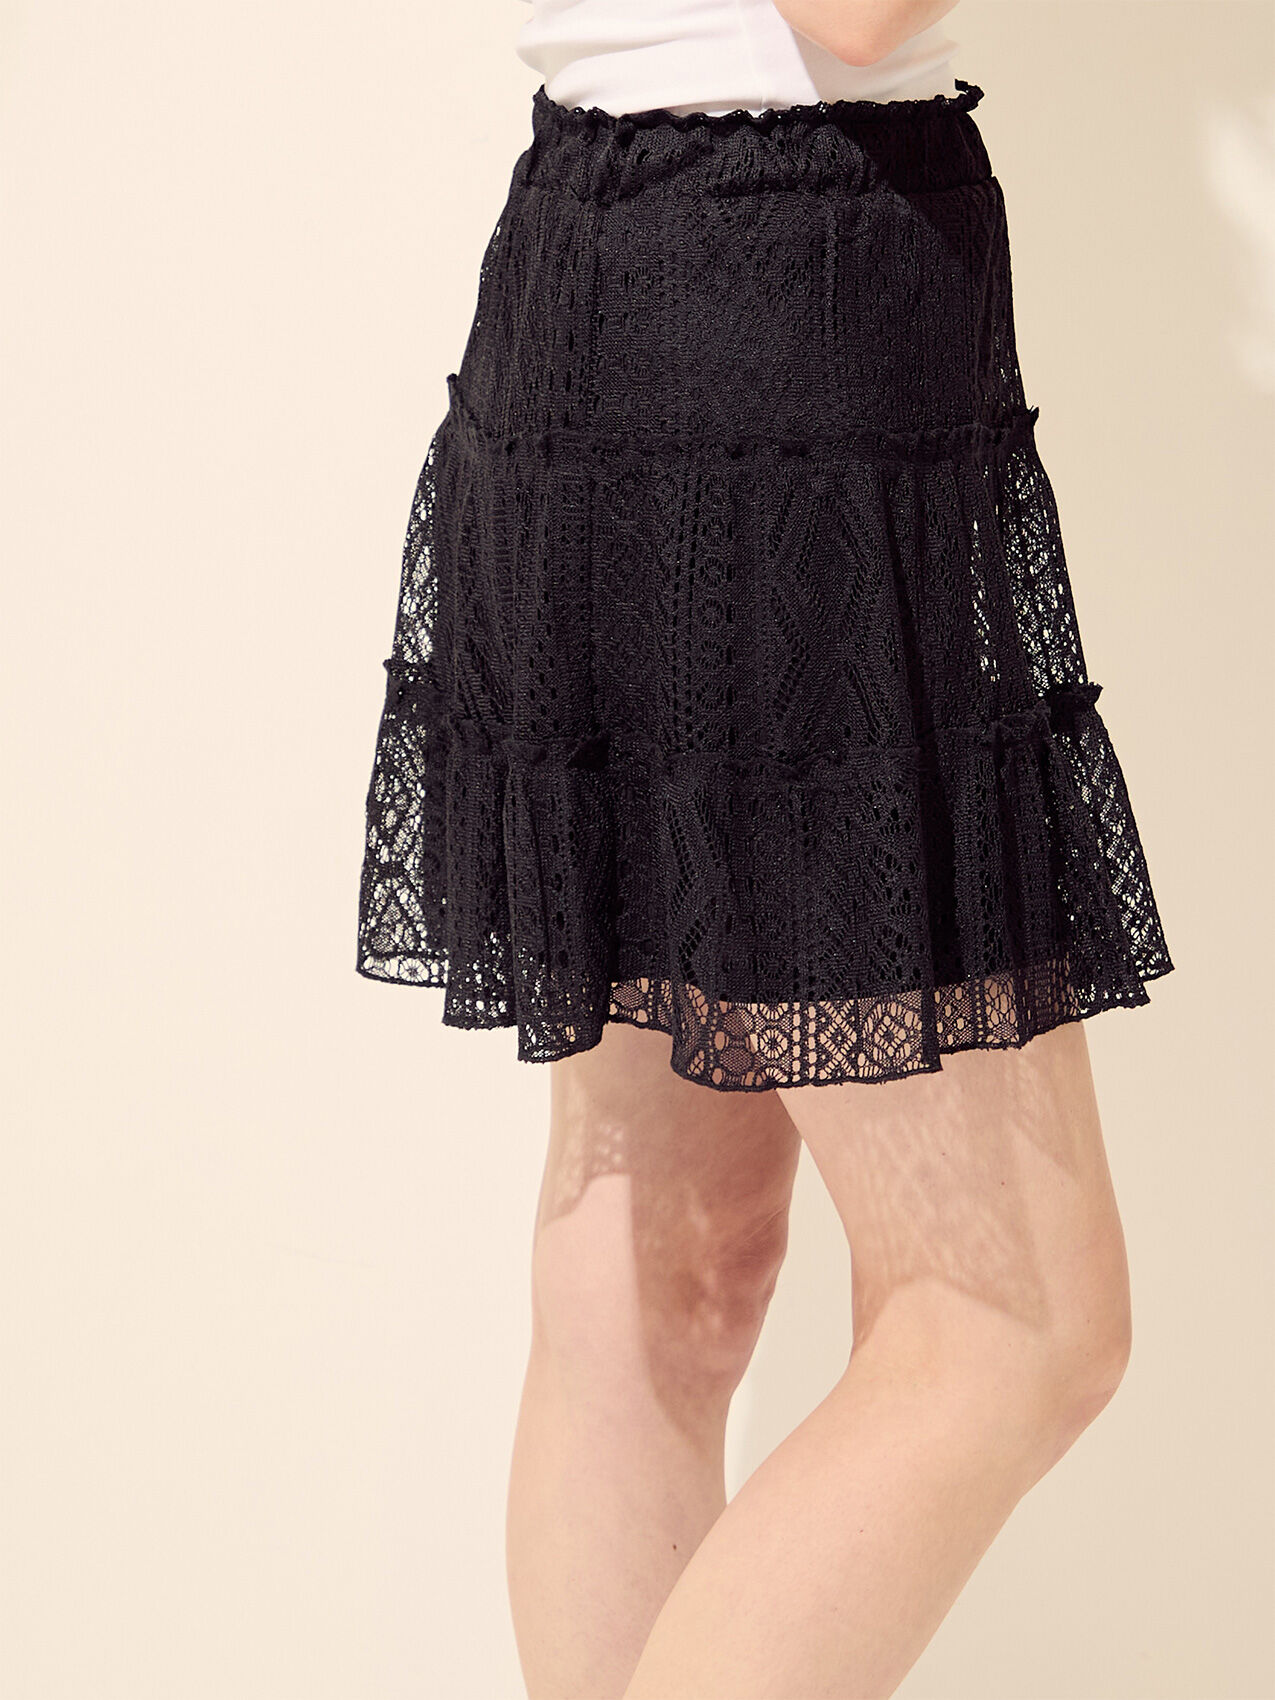 Short Black Lace Tiered Skirt